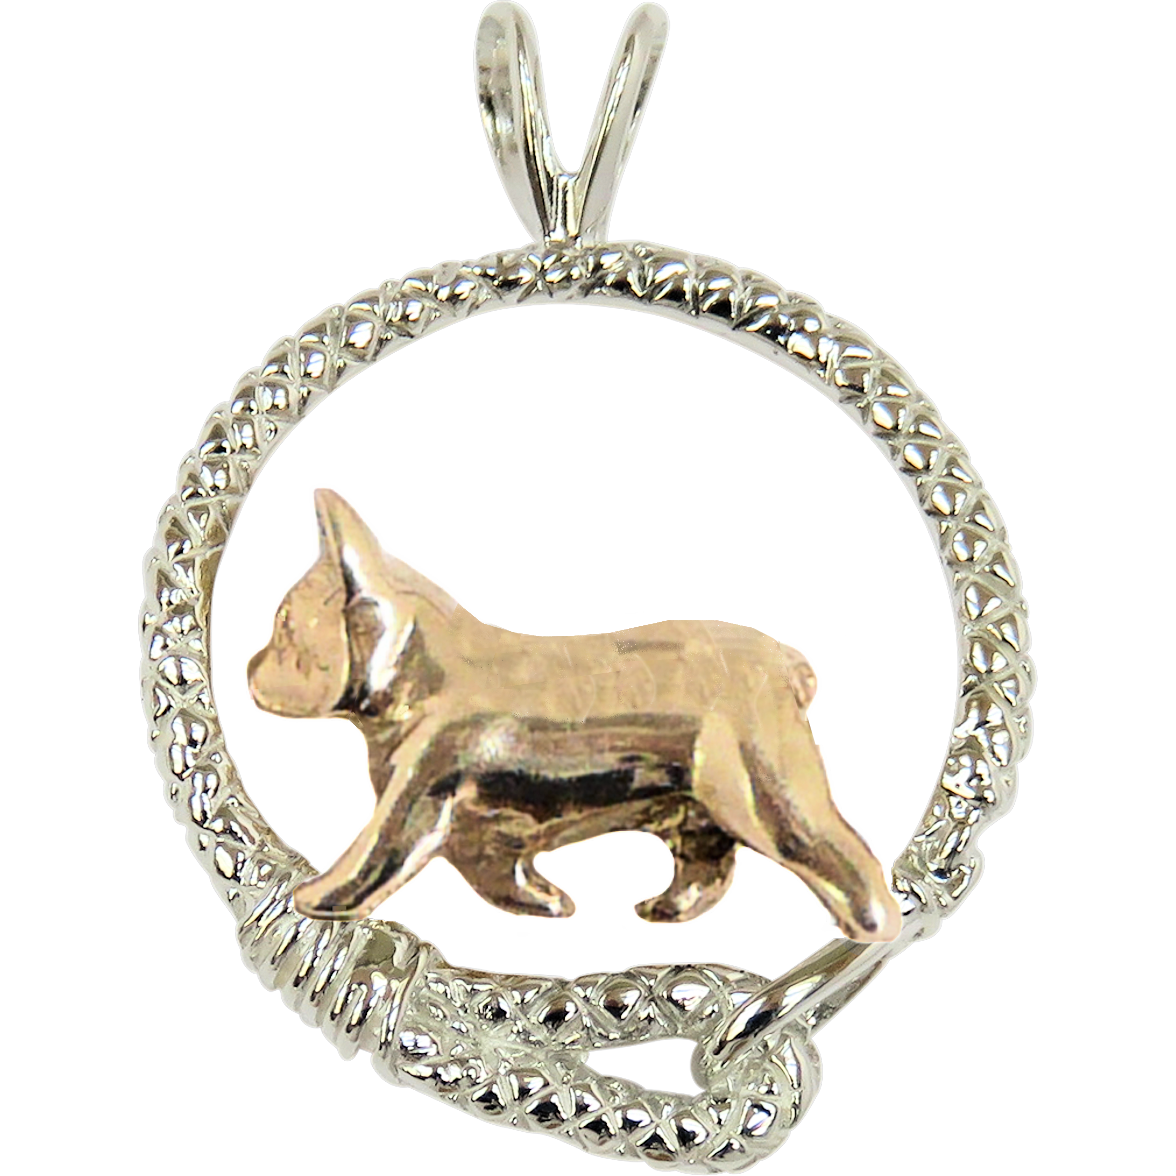 VONALA French Bulldog Necklace 925 Sterling Silver Cute Animal Heart Pendant  Jewelry Gifts for Women Girls : Amazon.ca: Clothing, Shoes & Accessories